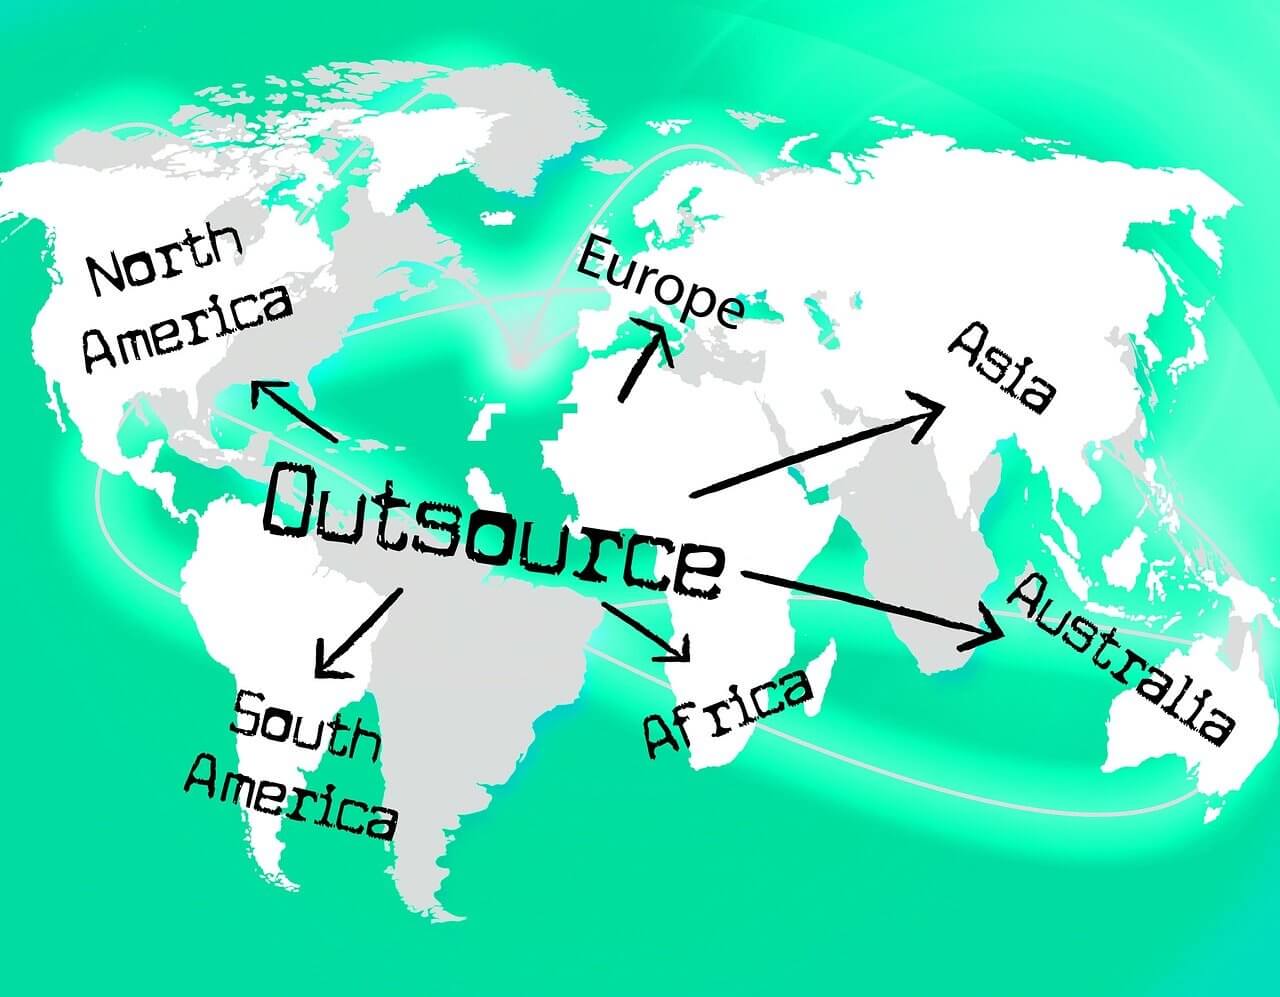 Outsourcing is a common practice for many companies